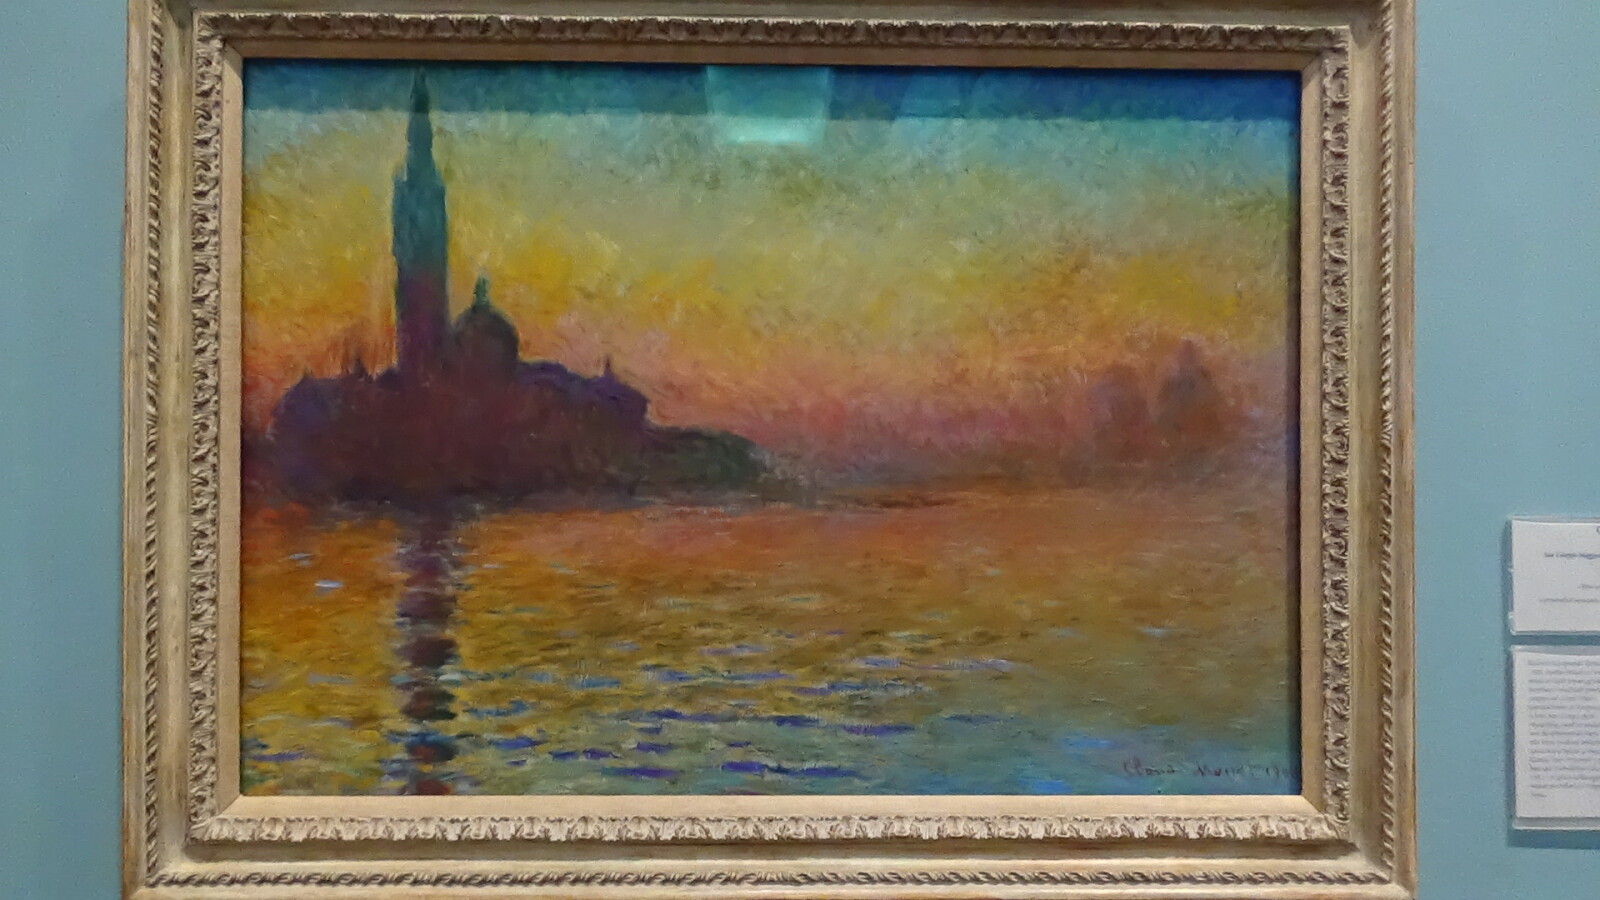 photograph of the Claude Monet painting San Giorgio Maggiore by Twilight, in the gallery at National Museum Cardiff